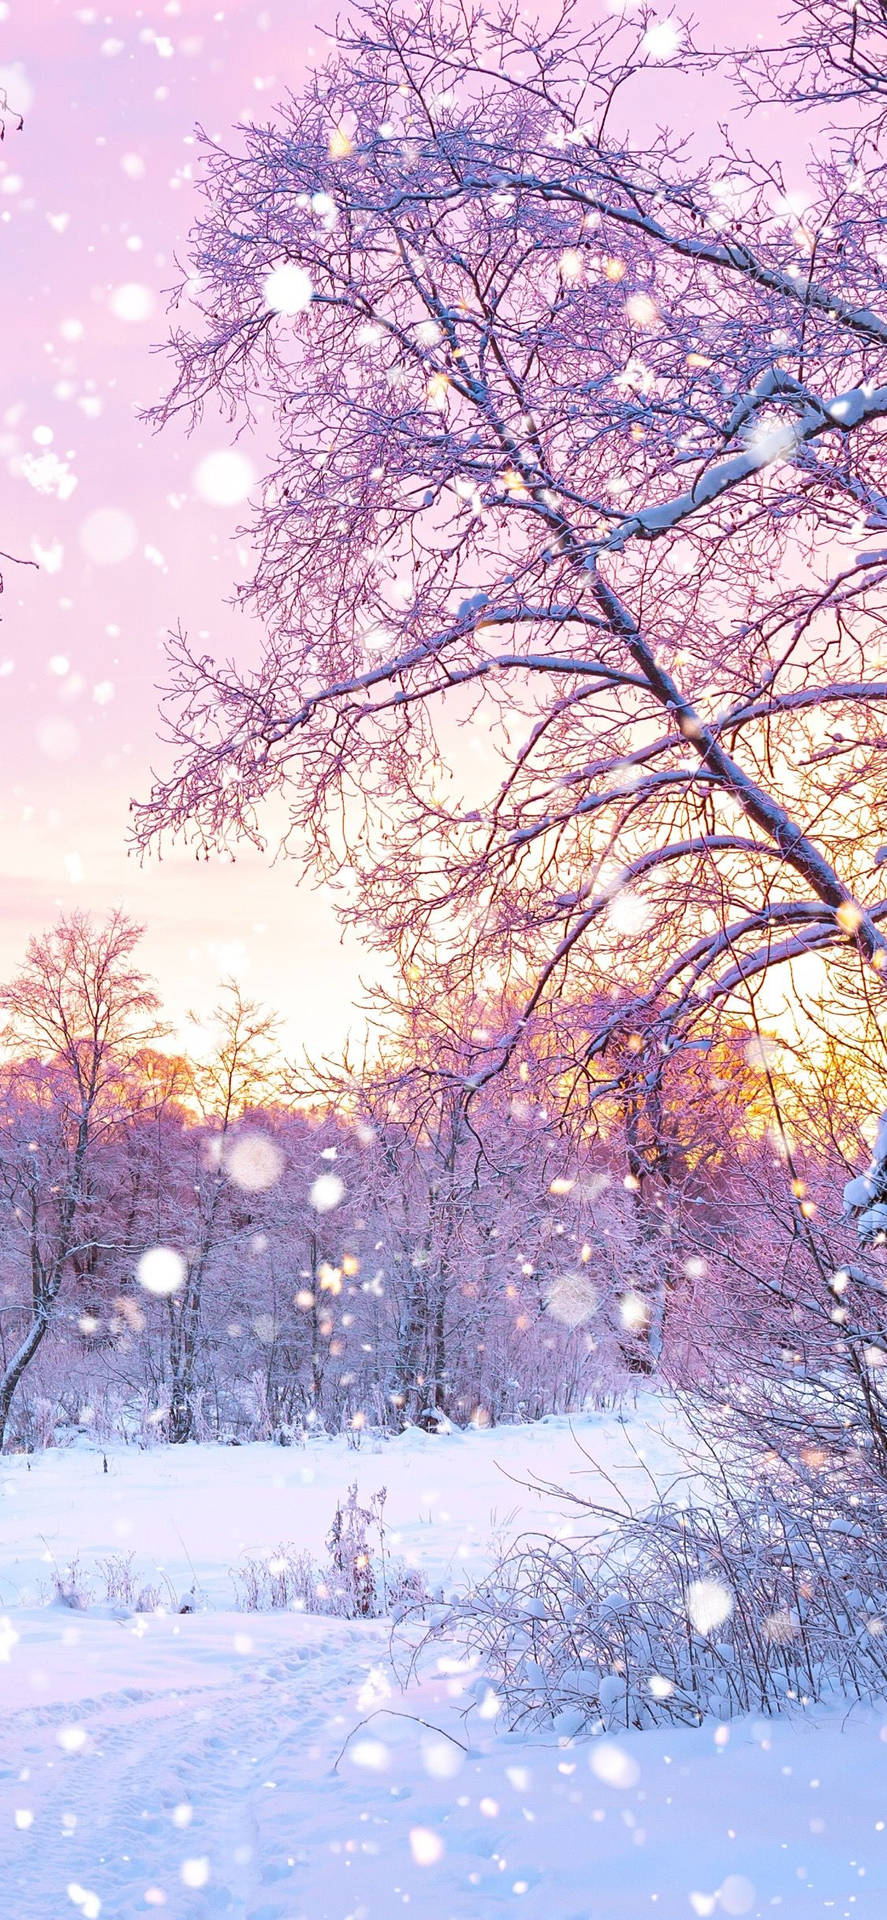 100+] Cute Winter Iphone Background s | Wallpapers.com